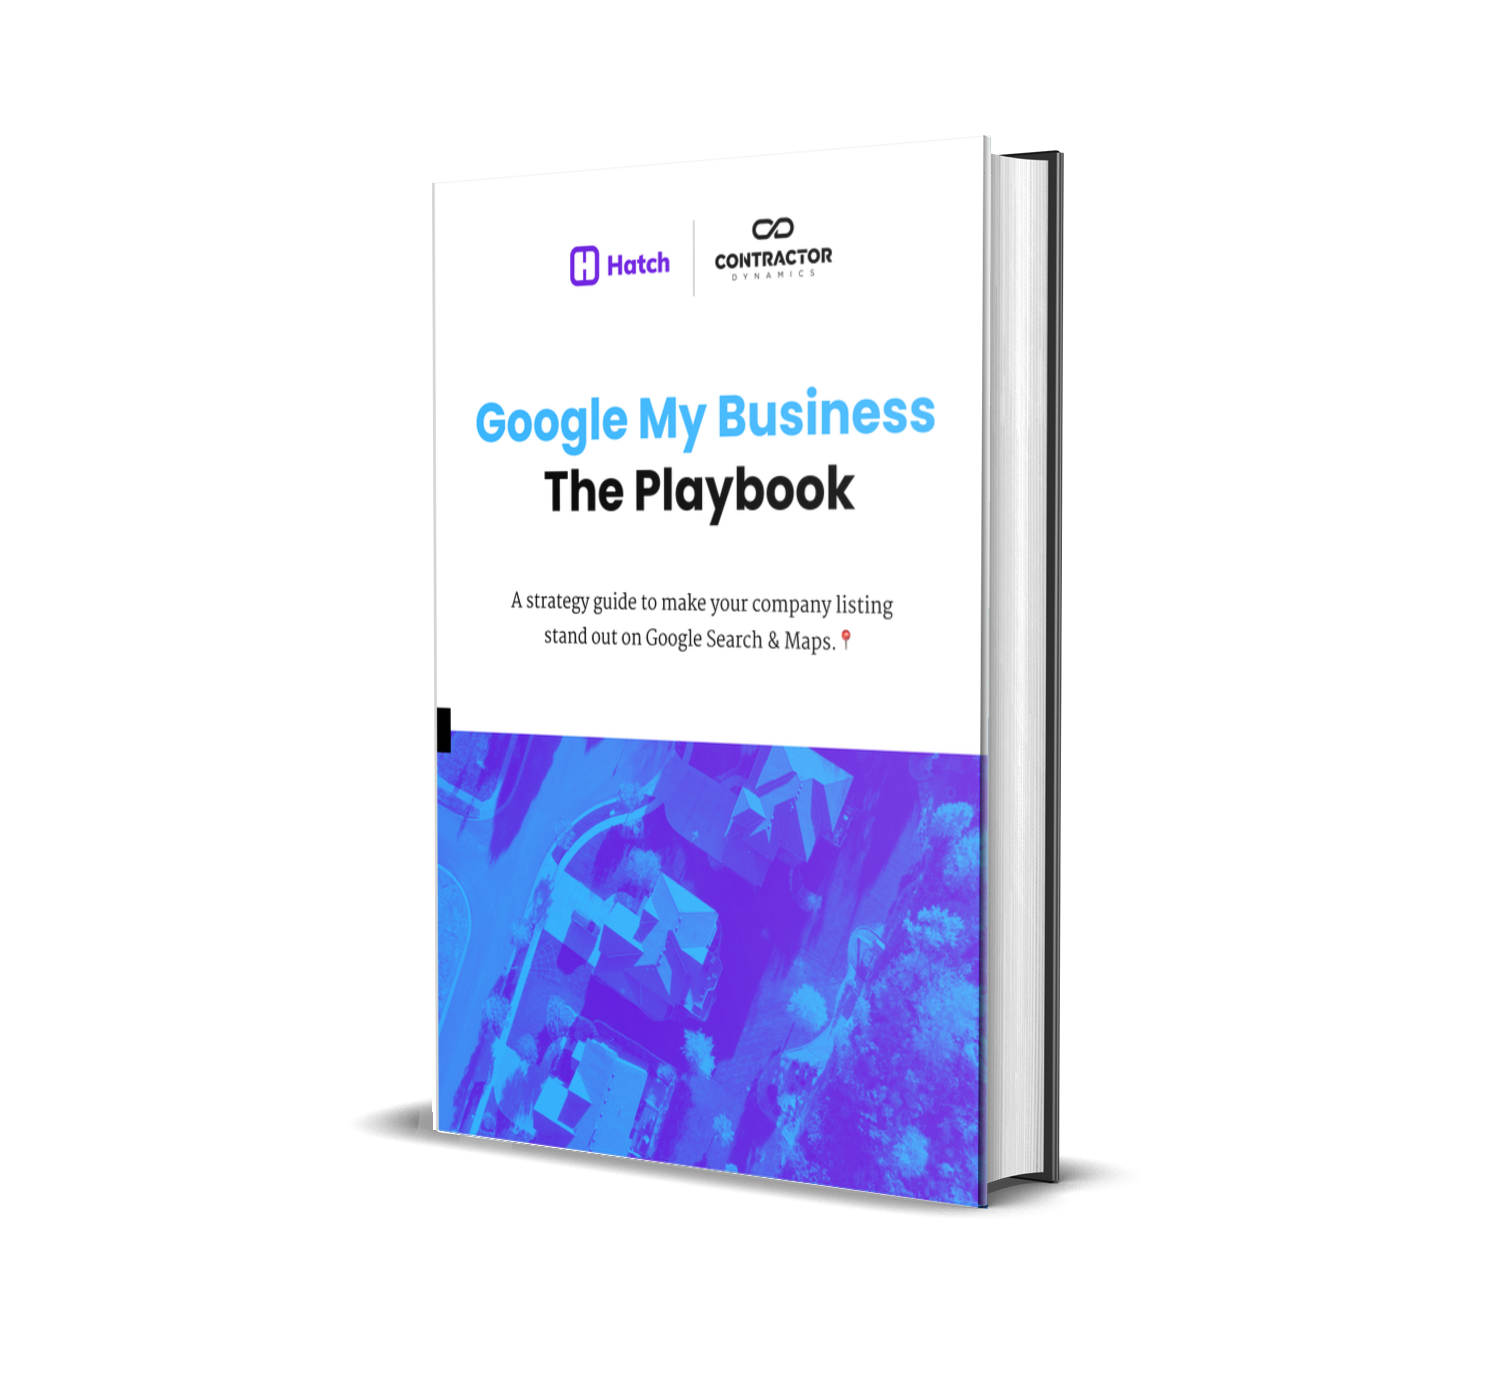 Google My Business: The Playbook